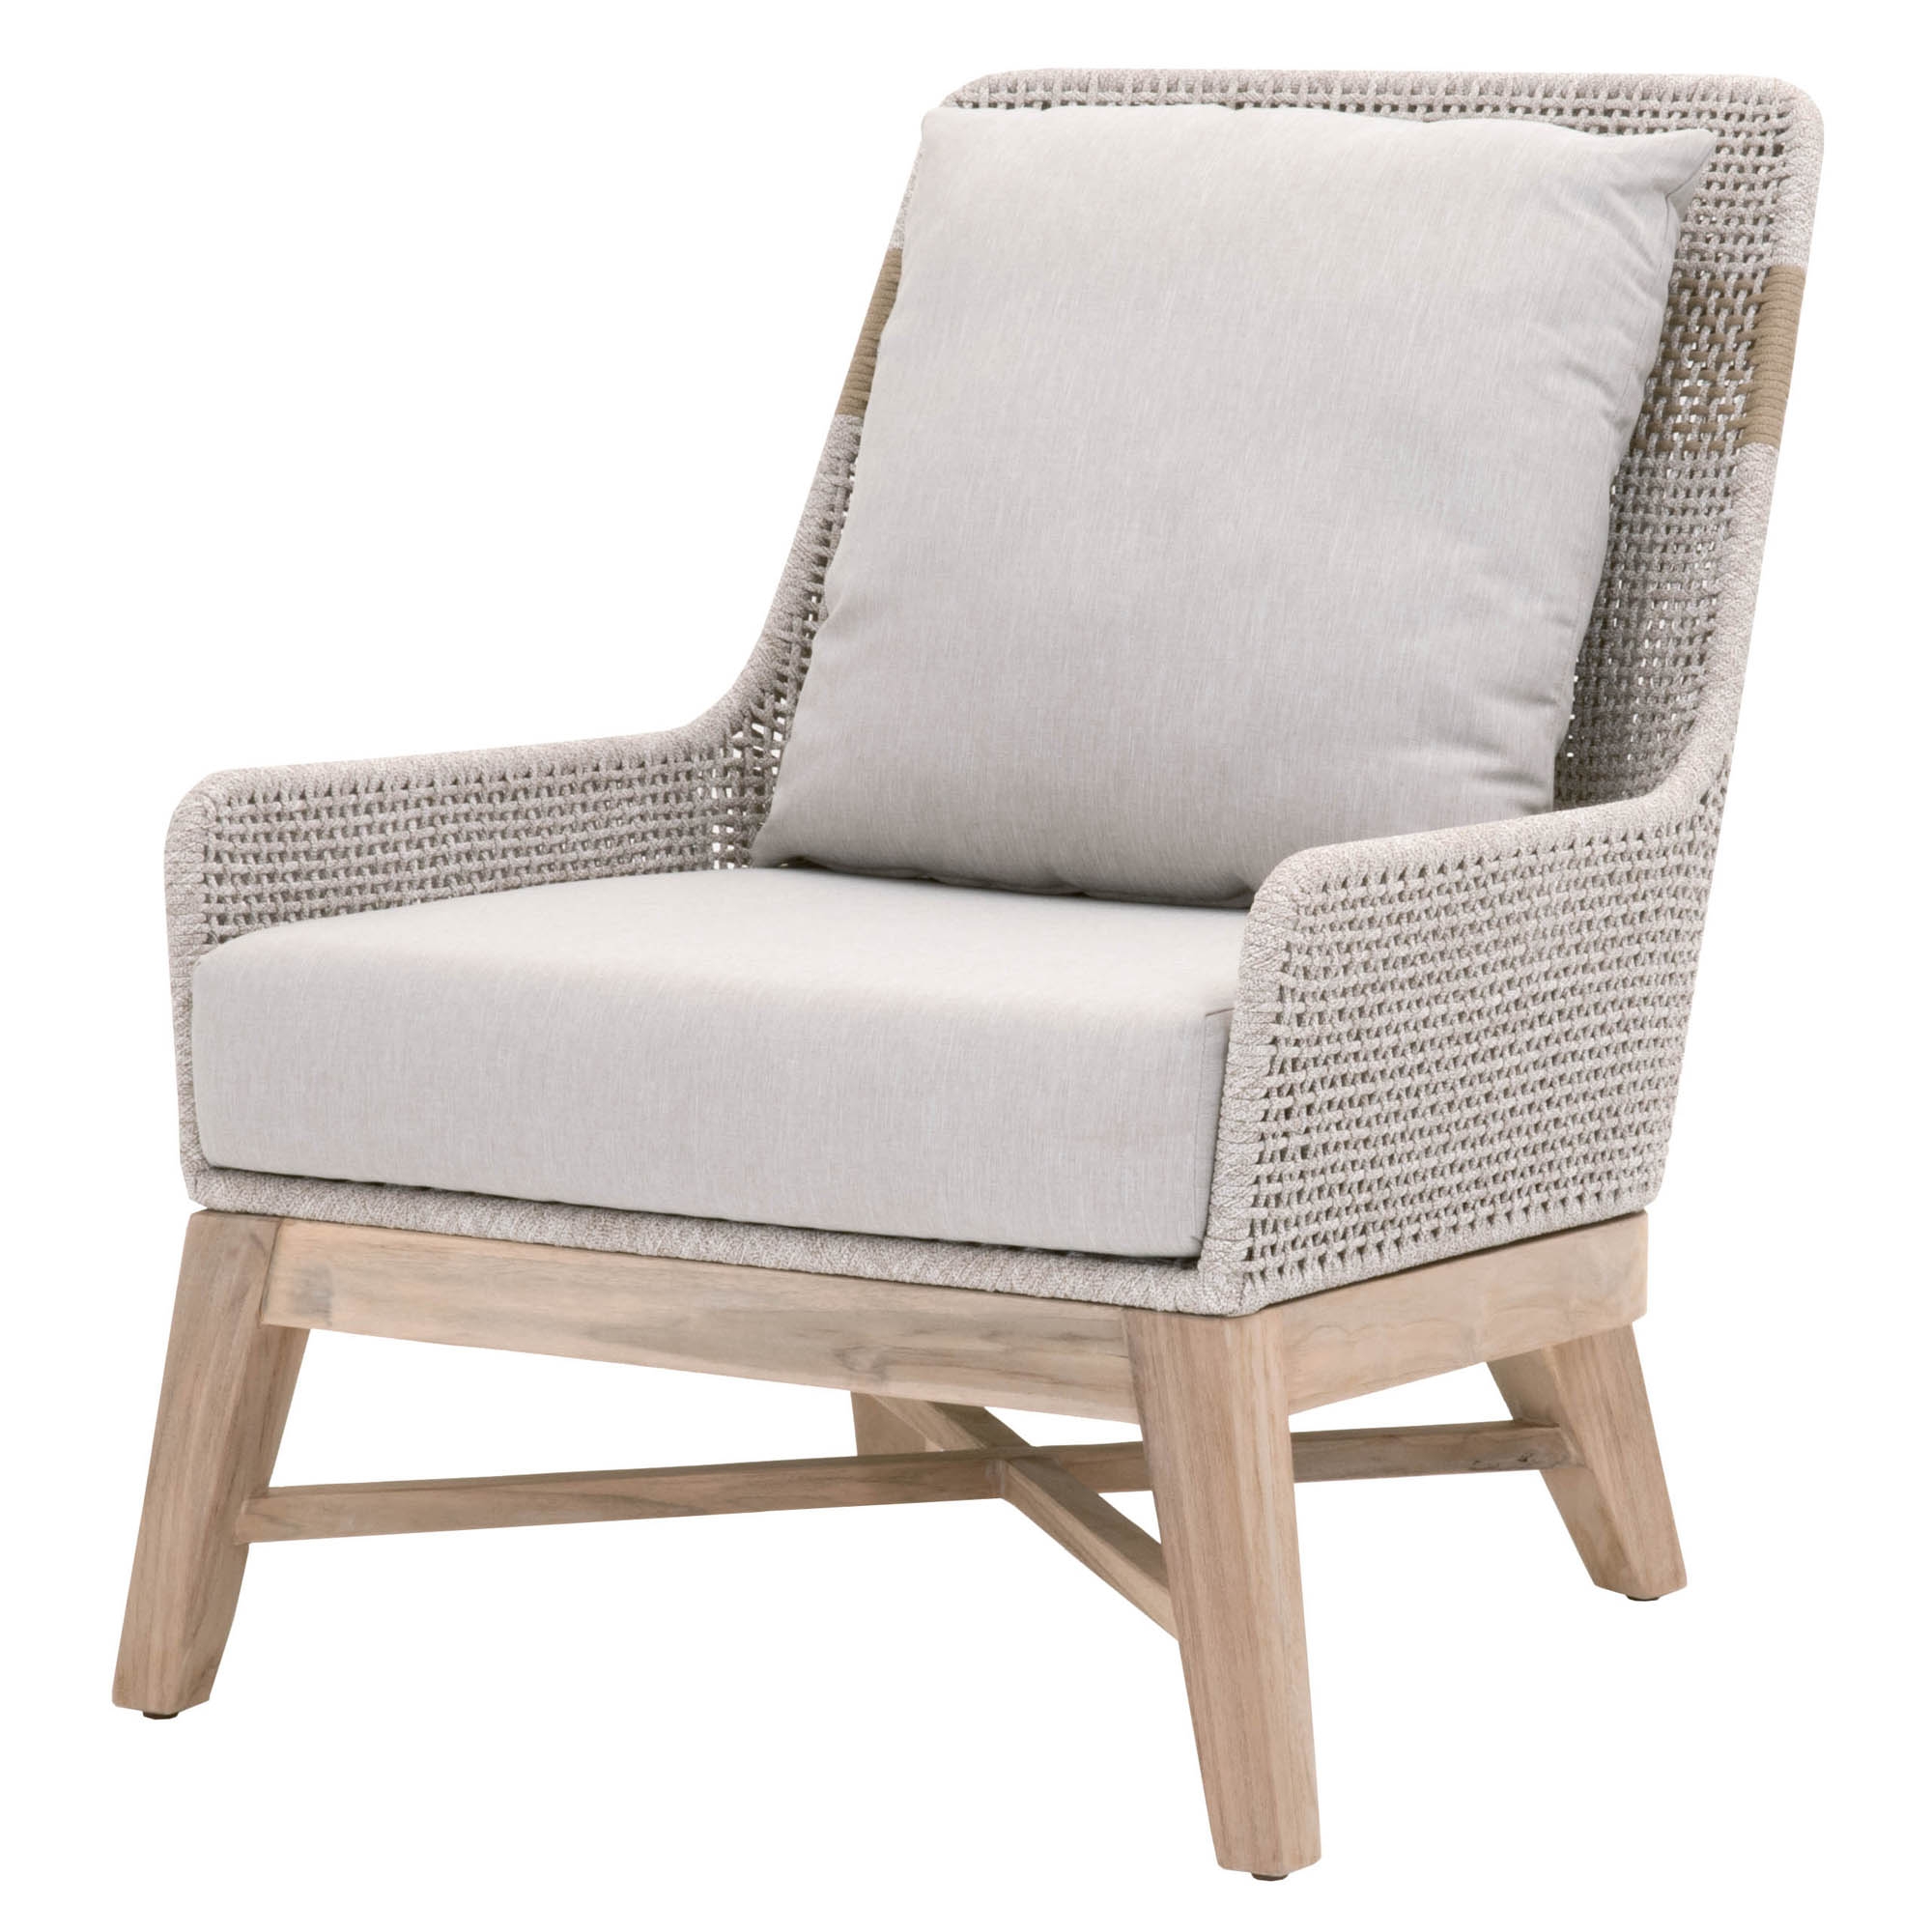 Tapestry Outdoor Club Chair, Taupe - Image 1